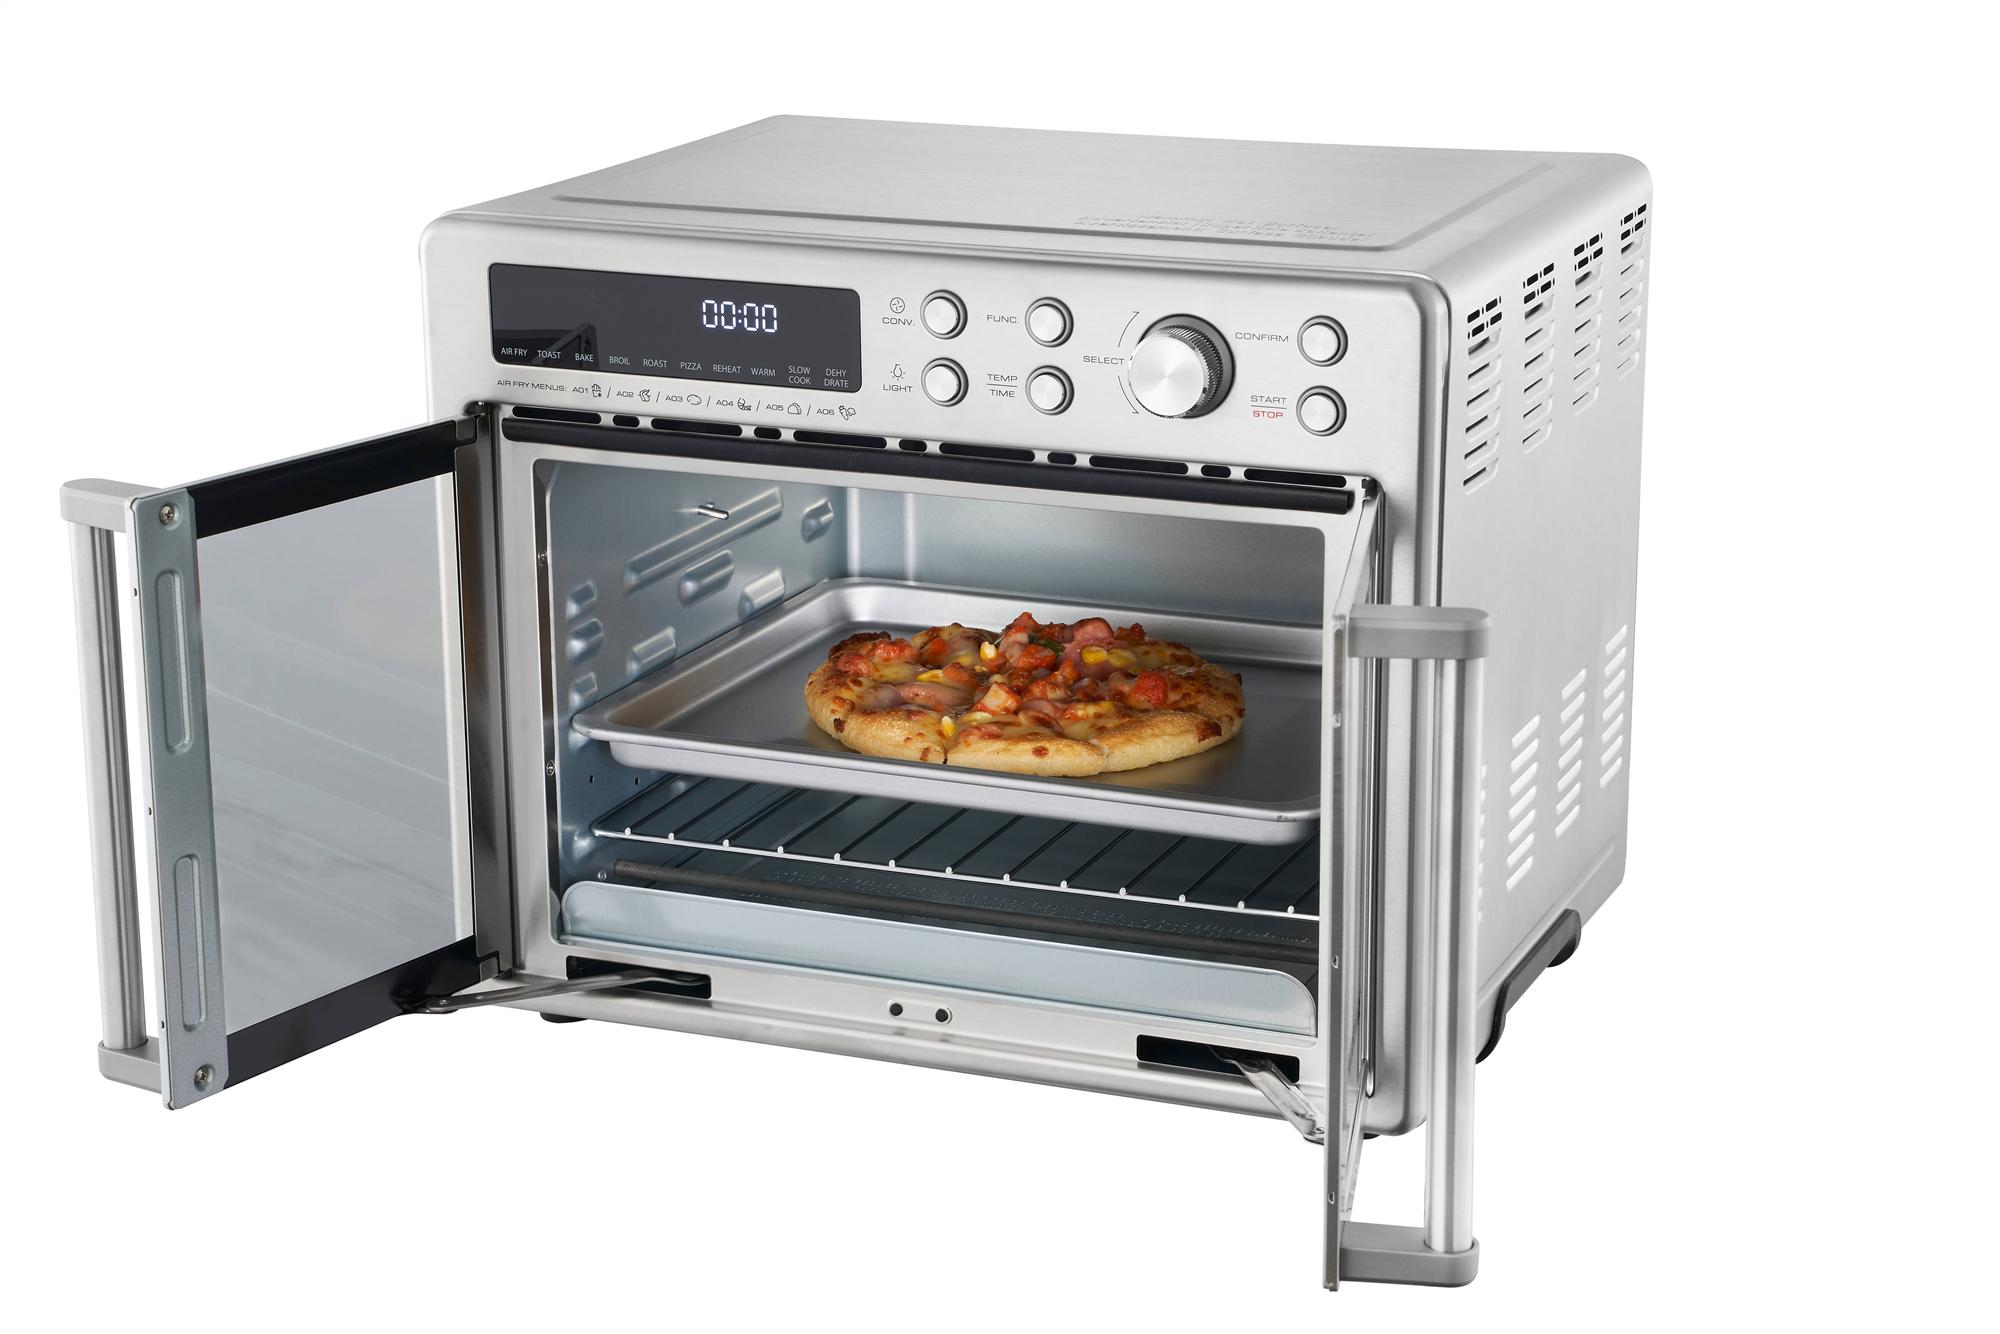 Farberware 25L 6-Slice Toaster Oven with Air Fry for $99.99 Shipped